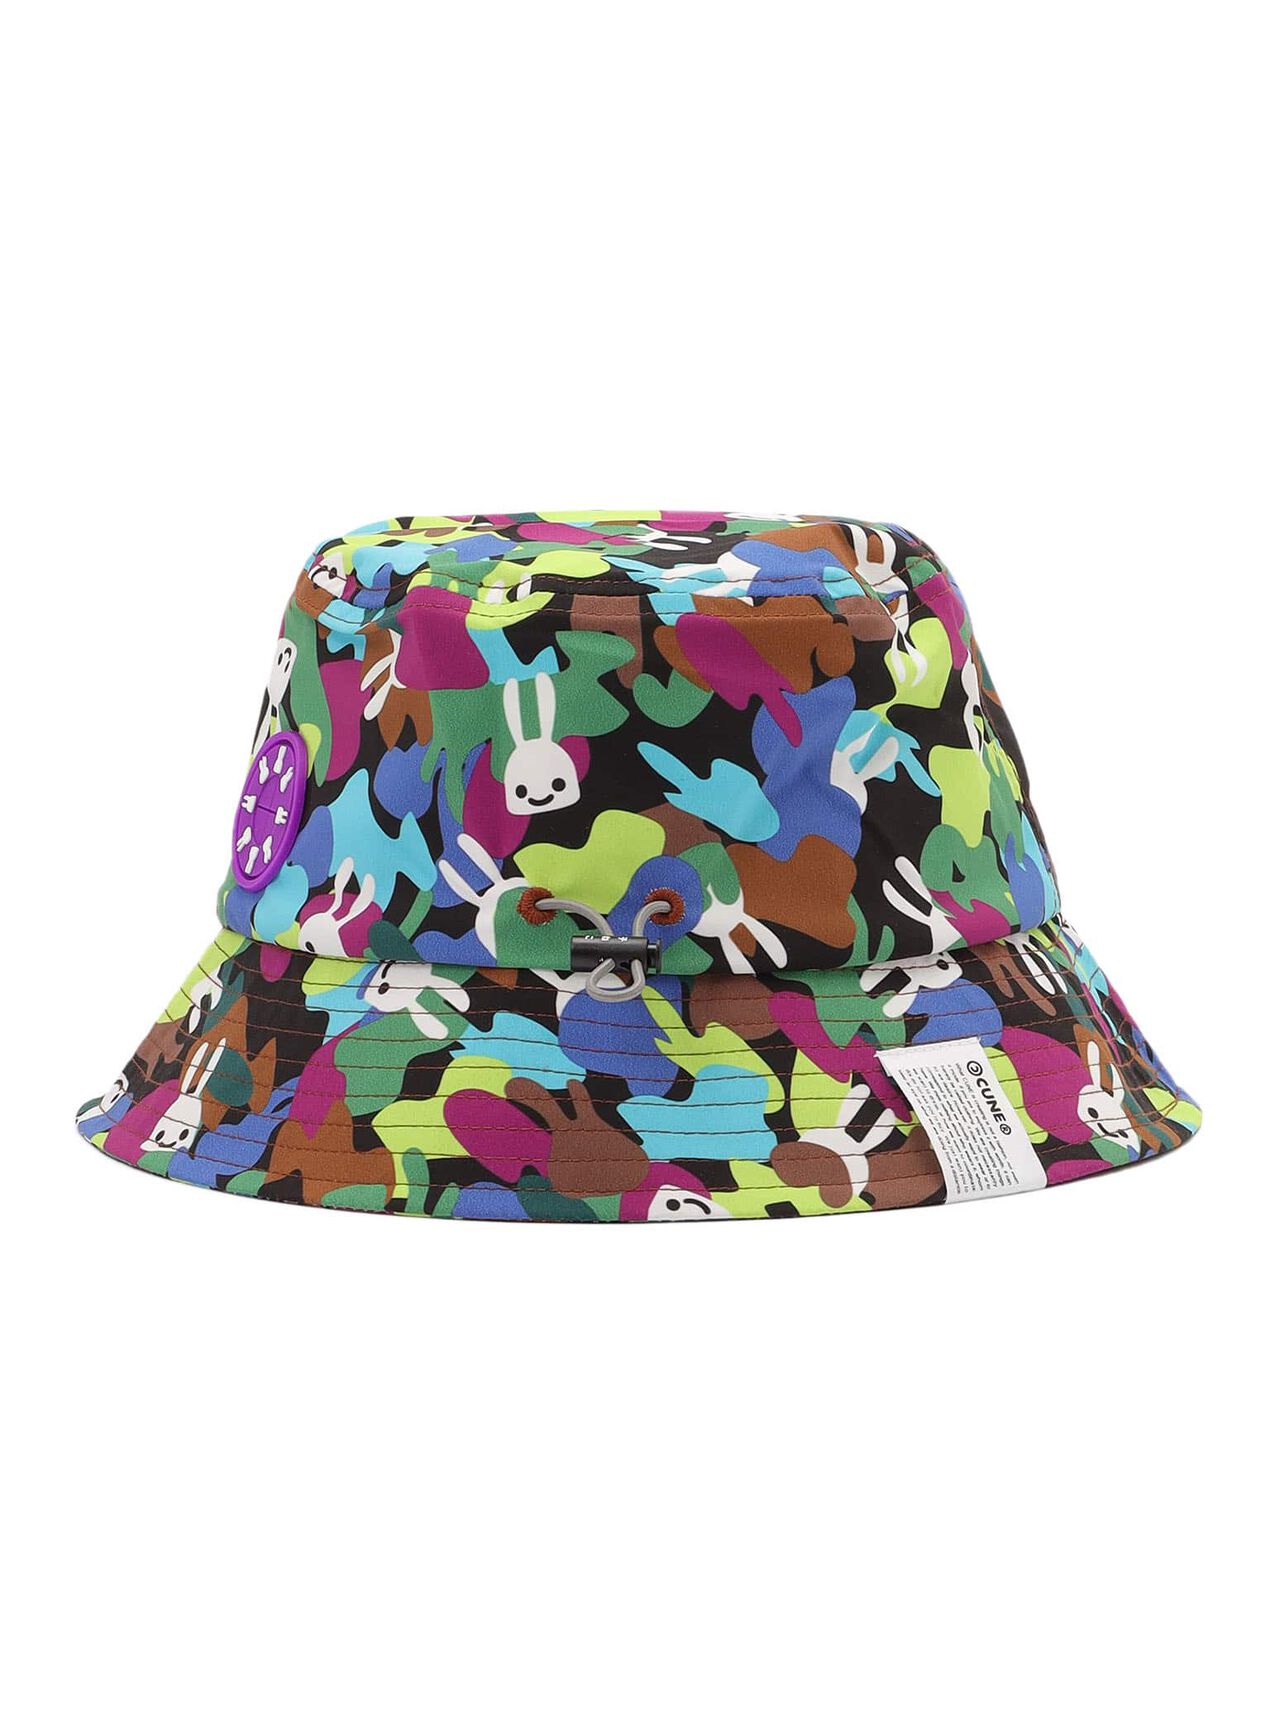 CUNE CAMO Bucket Hat,ONE, large image number 1